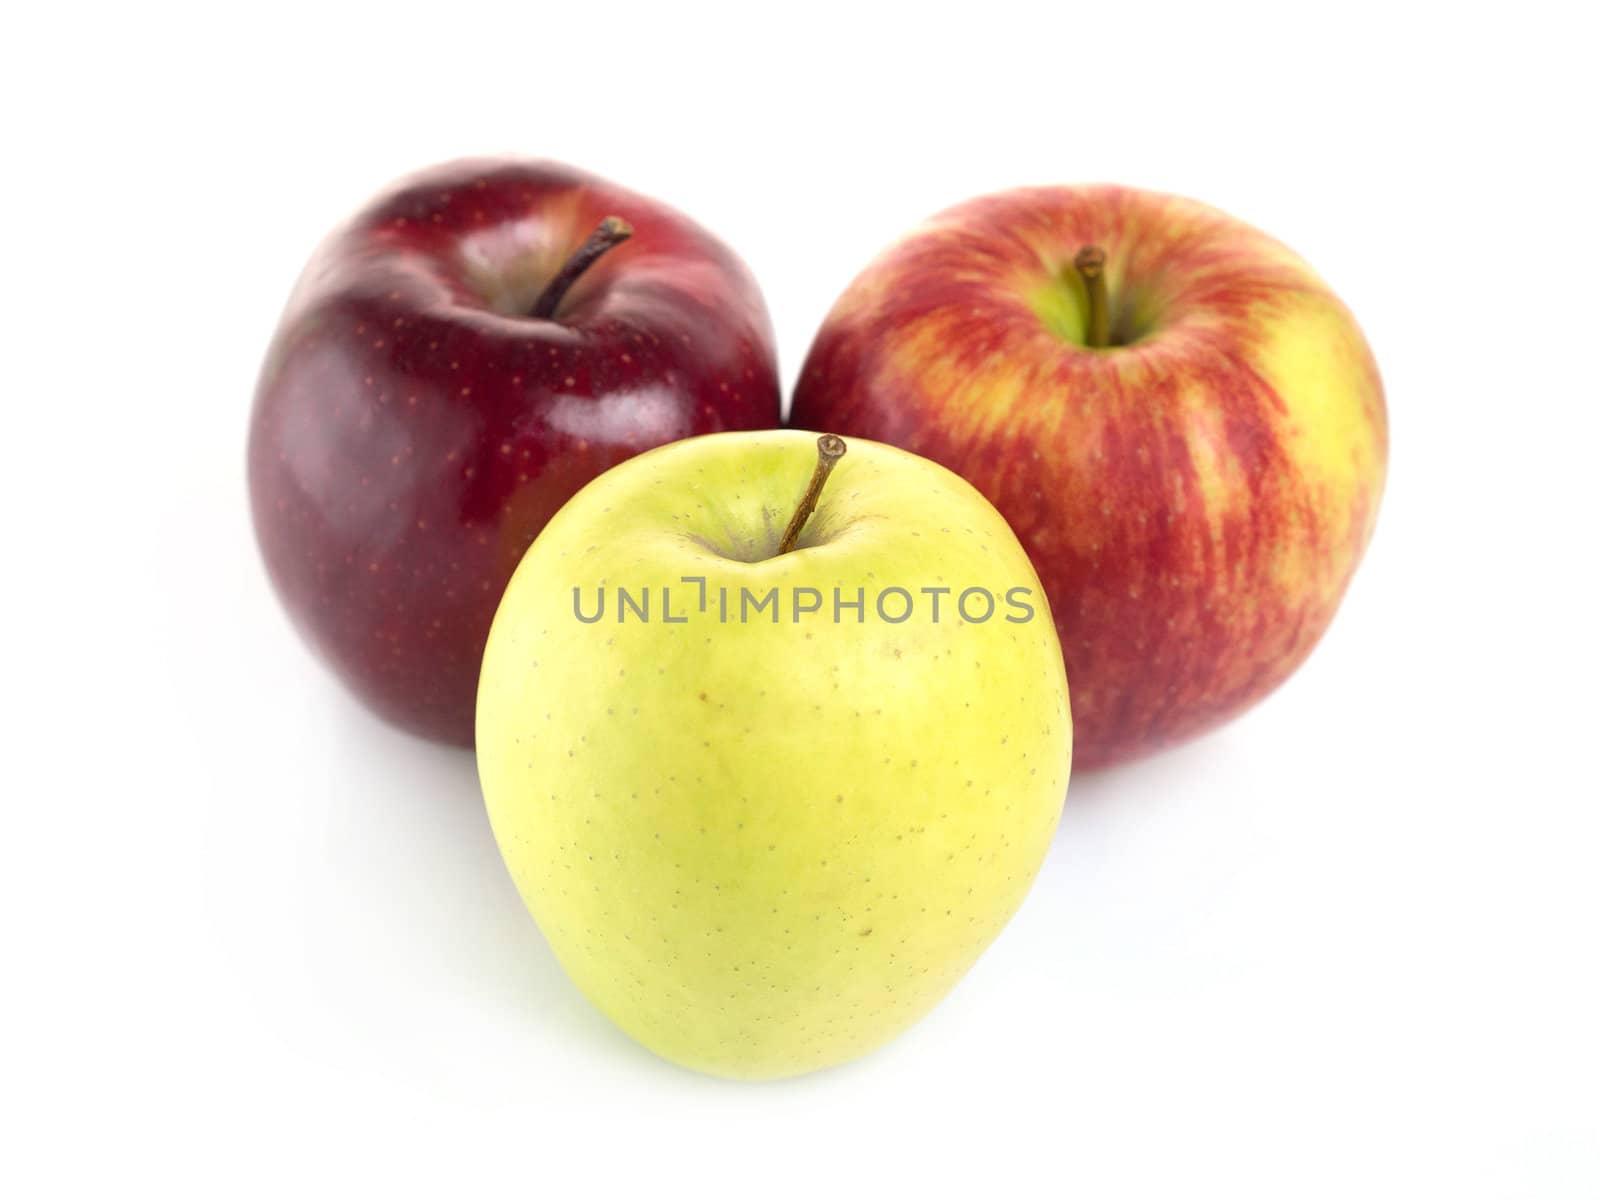 Three apples arranged on a white background